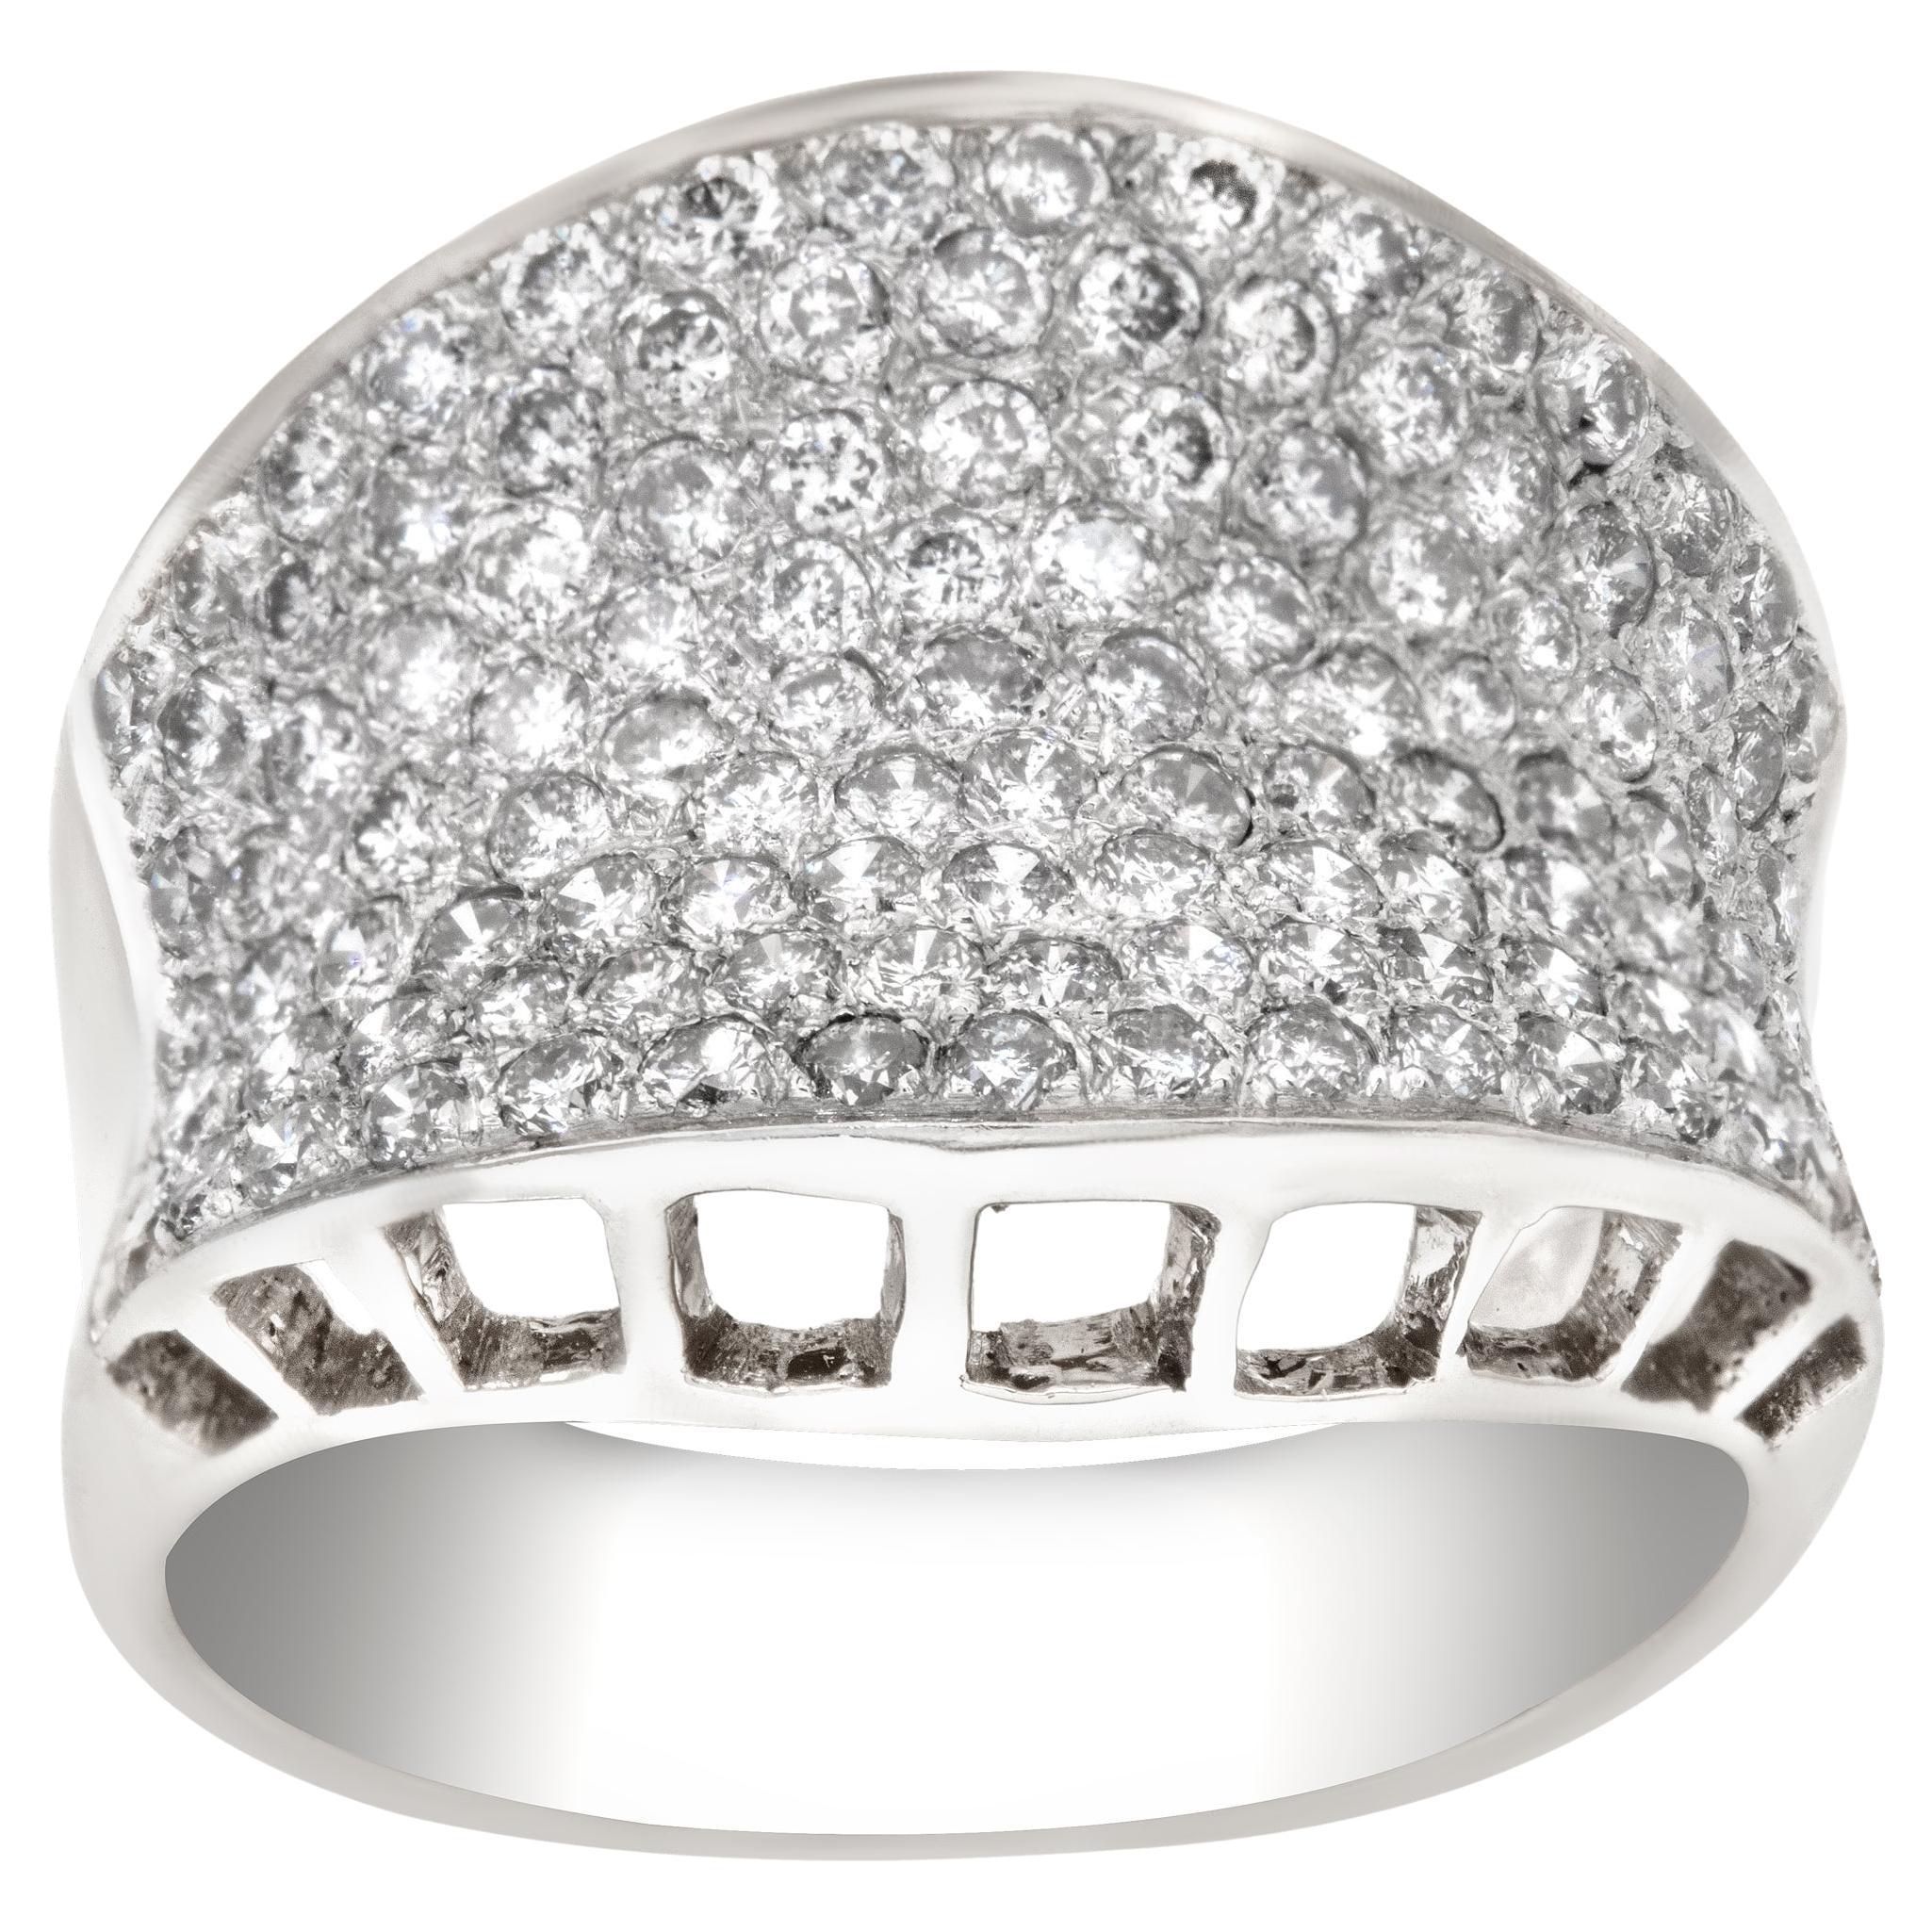 Exquisite Pave Diamond Ring in 18k White Gold. 1.25 Carats in Pave Diamonds